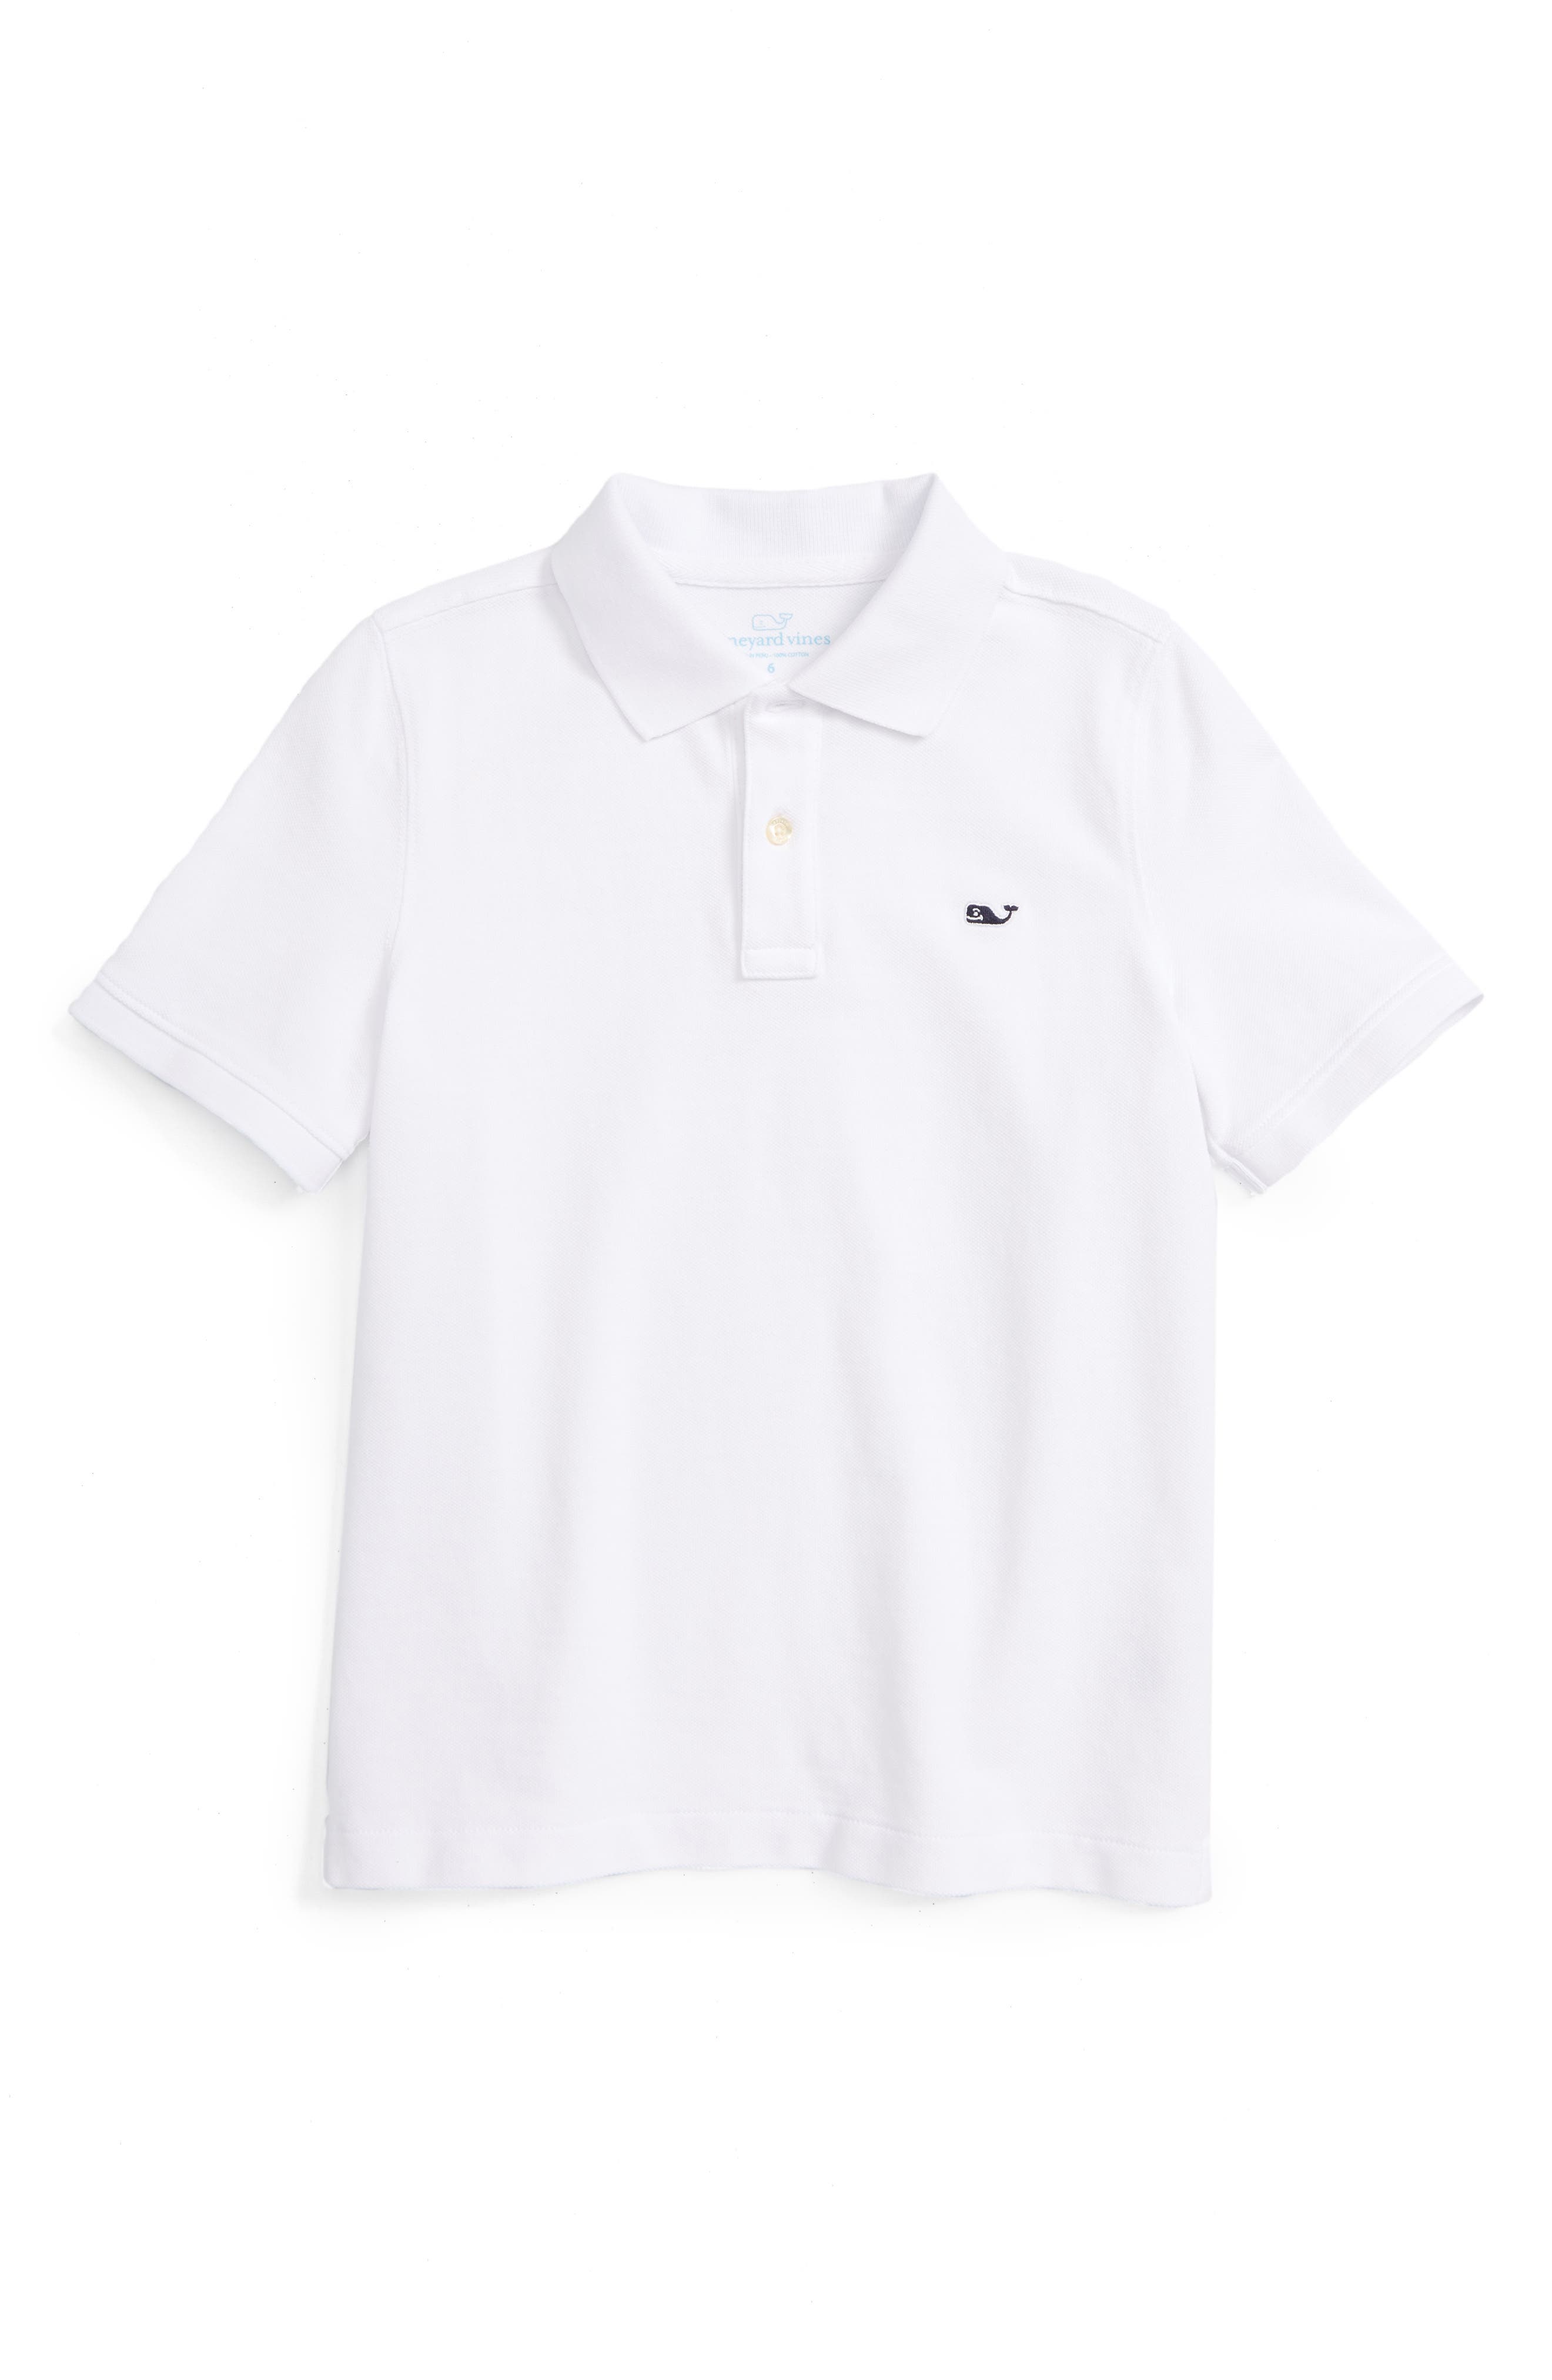 Details about   Seapointe kids short sleeves shirt